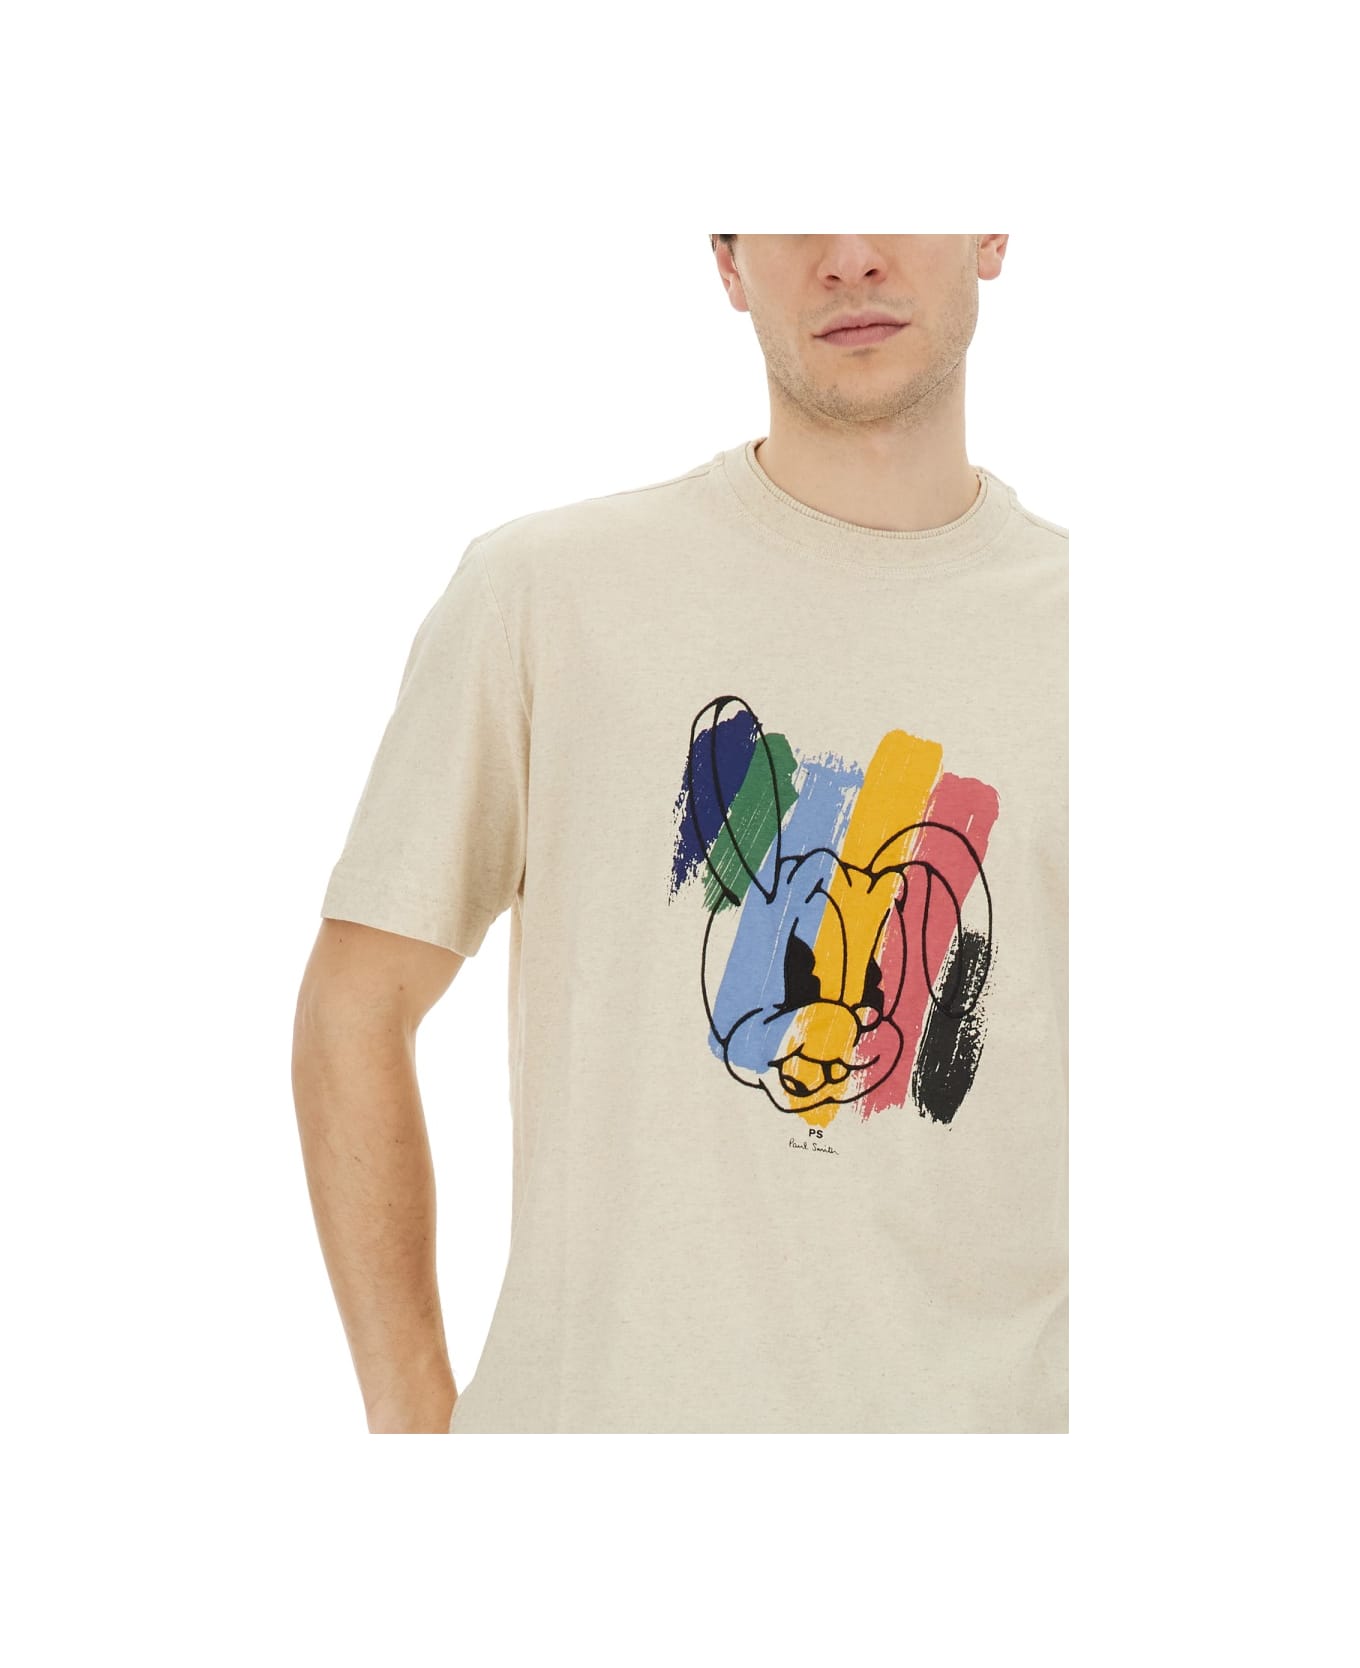 PS by Paul Smith "rabbit" T-shirt - BEIGE